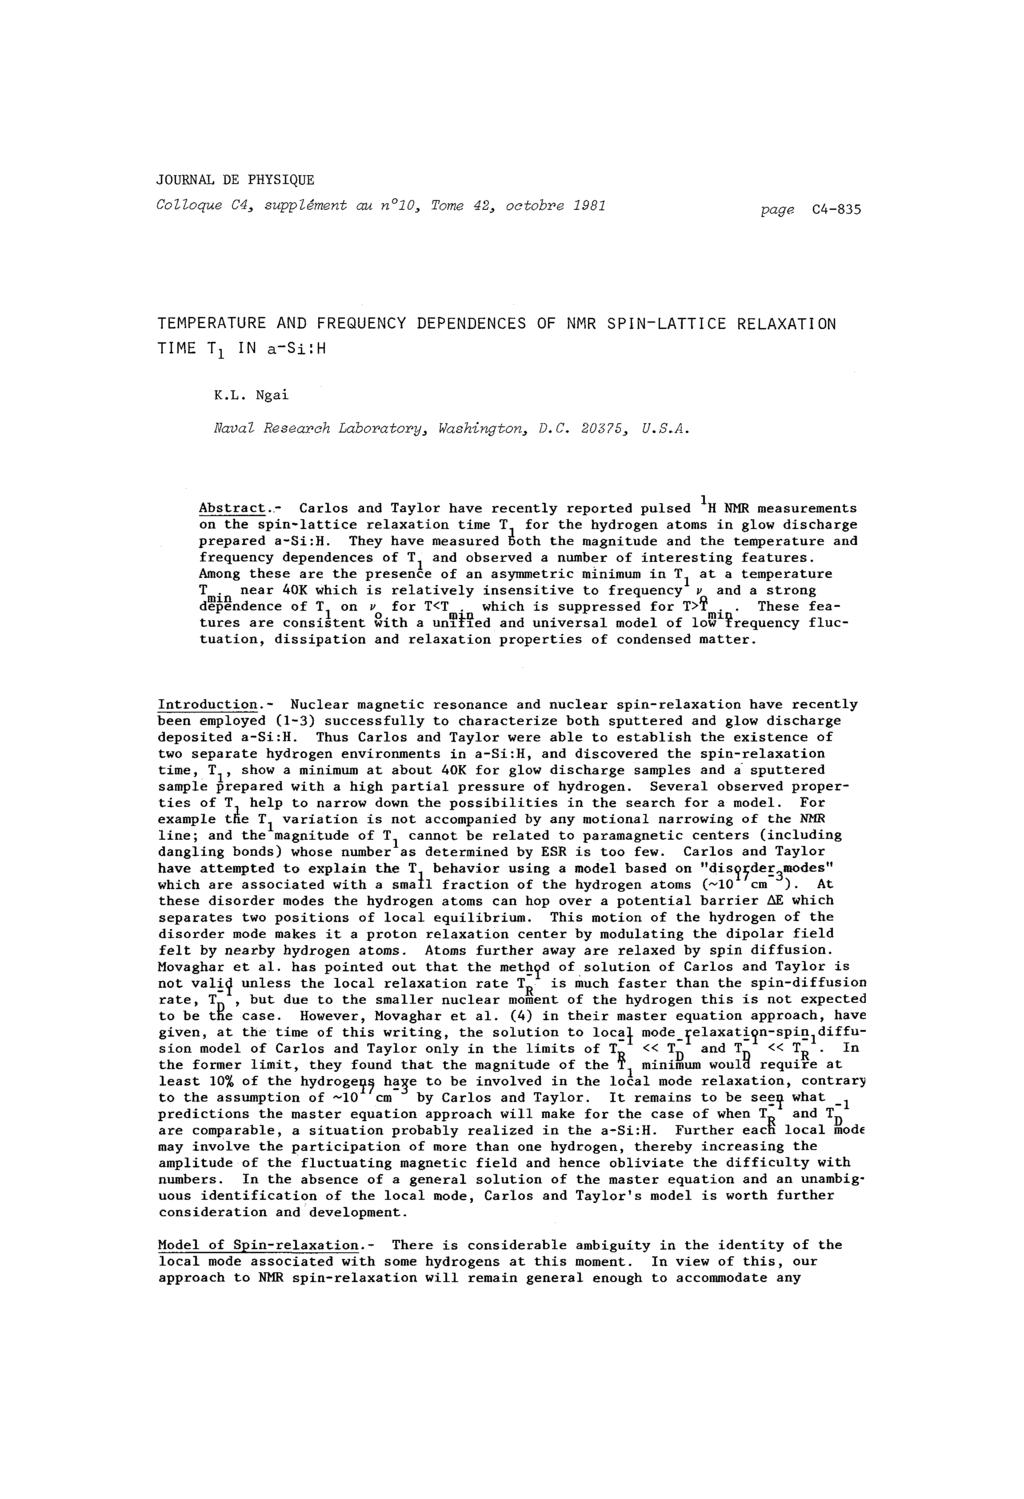 JOURNAL DE PHYSIQUE CoZZoque C4, suppz&ment au no1o, Tome 42, octobre 1981 page C4-835 TEMPERATURE AND FREQUENCY DEPENDENCES OF NMR SPIN-LATTICE RELAXATION TIME T, IN a-si:h K.L. Ngai NavaZ Research Laboratory, Washington, D.